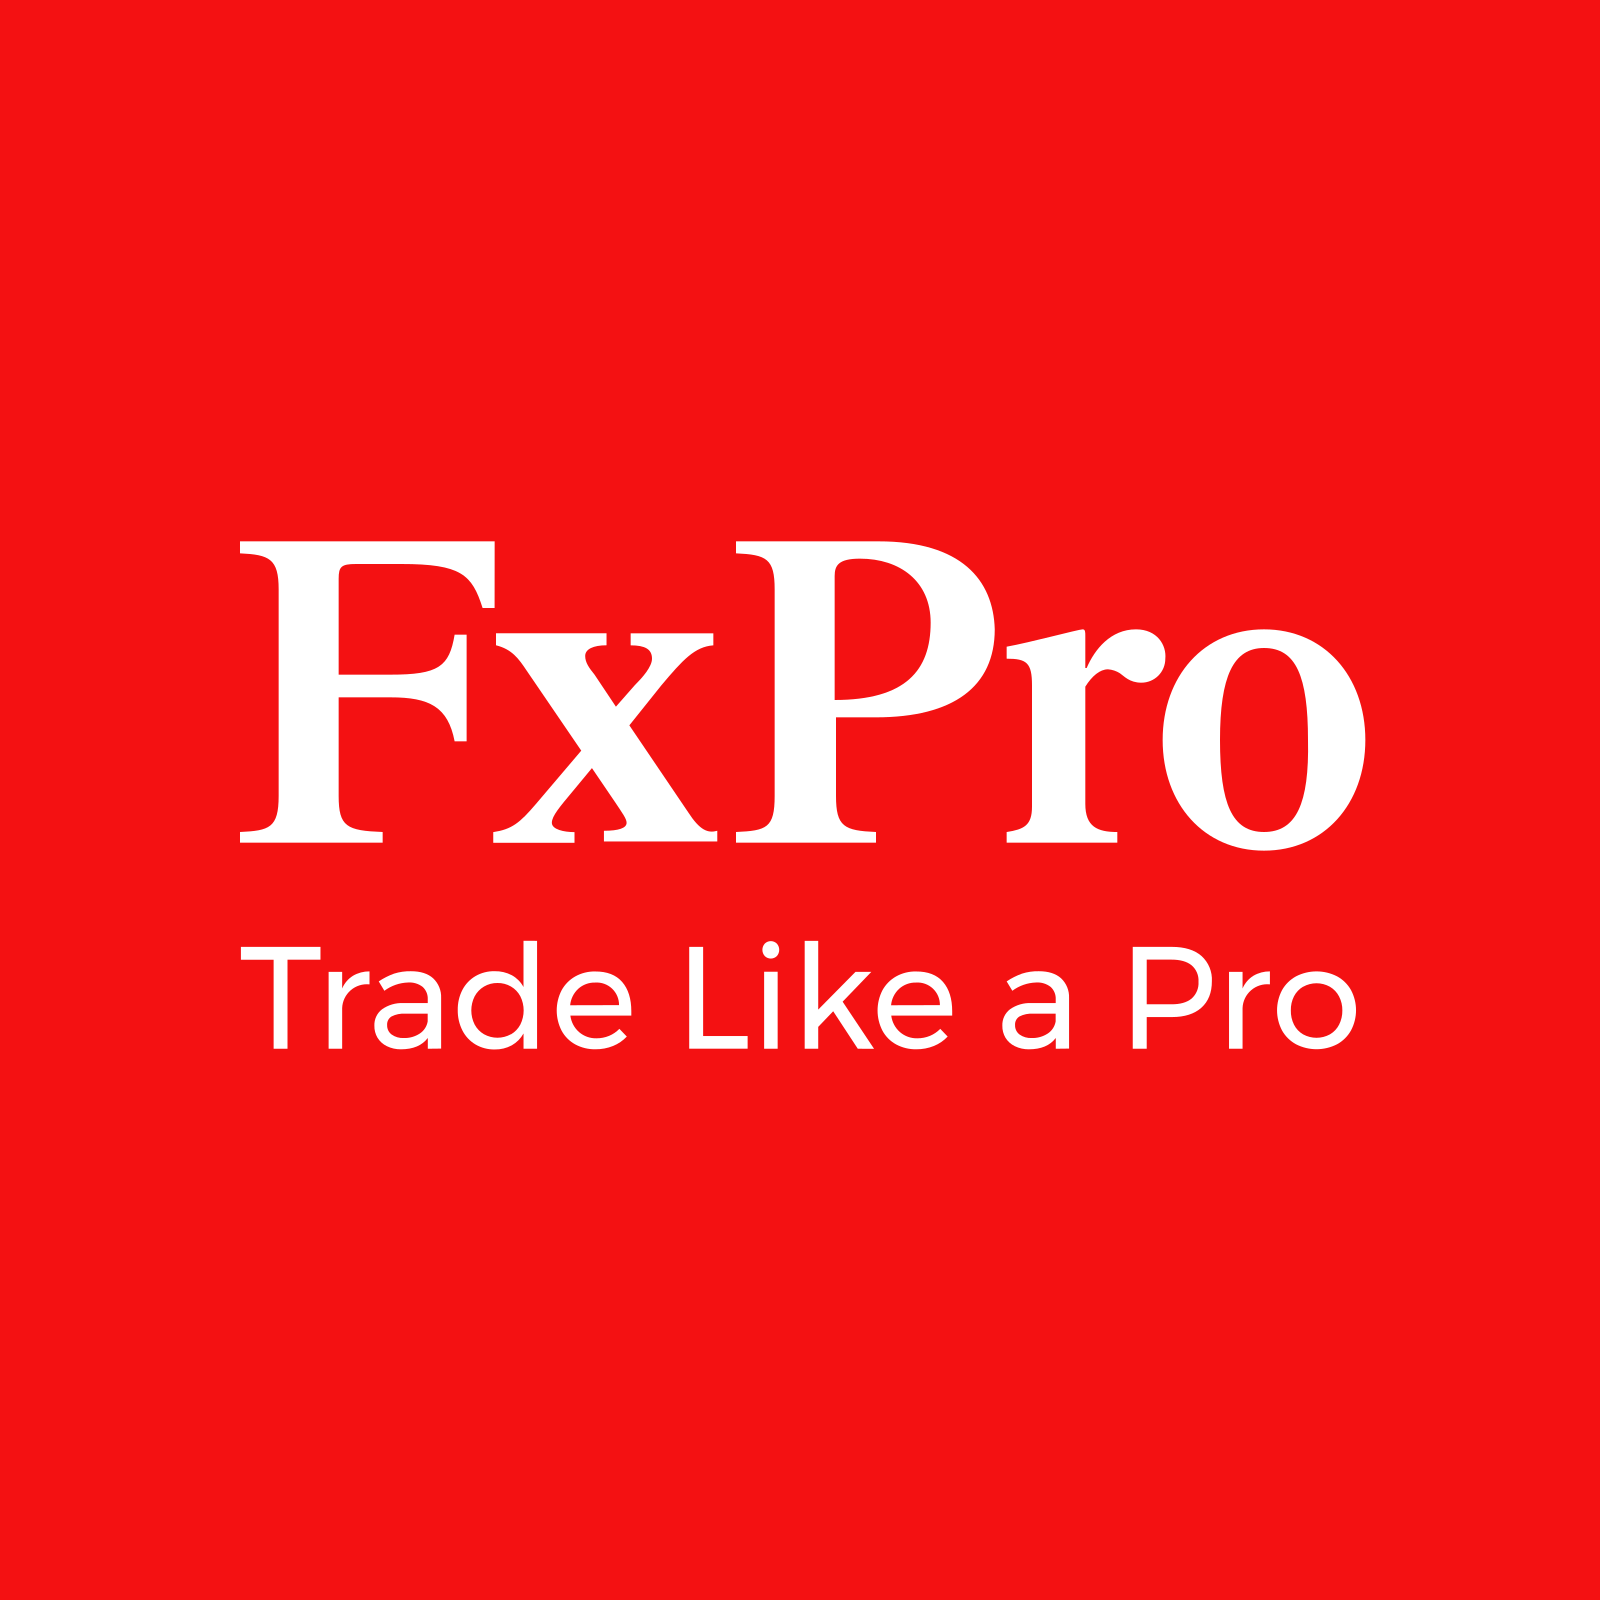 FxPro : FxPro is an online trading broker.